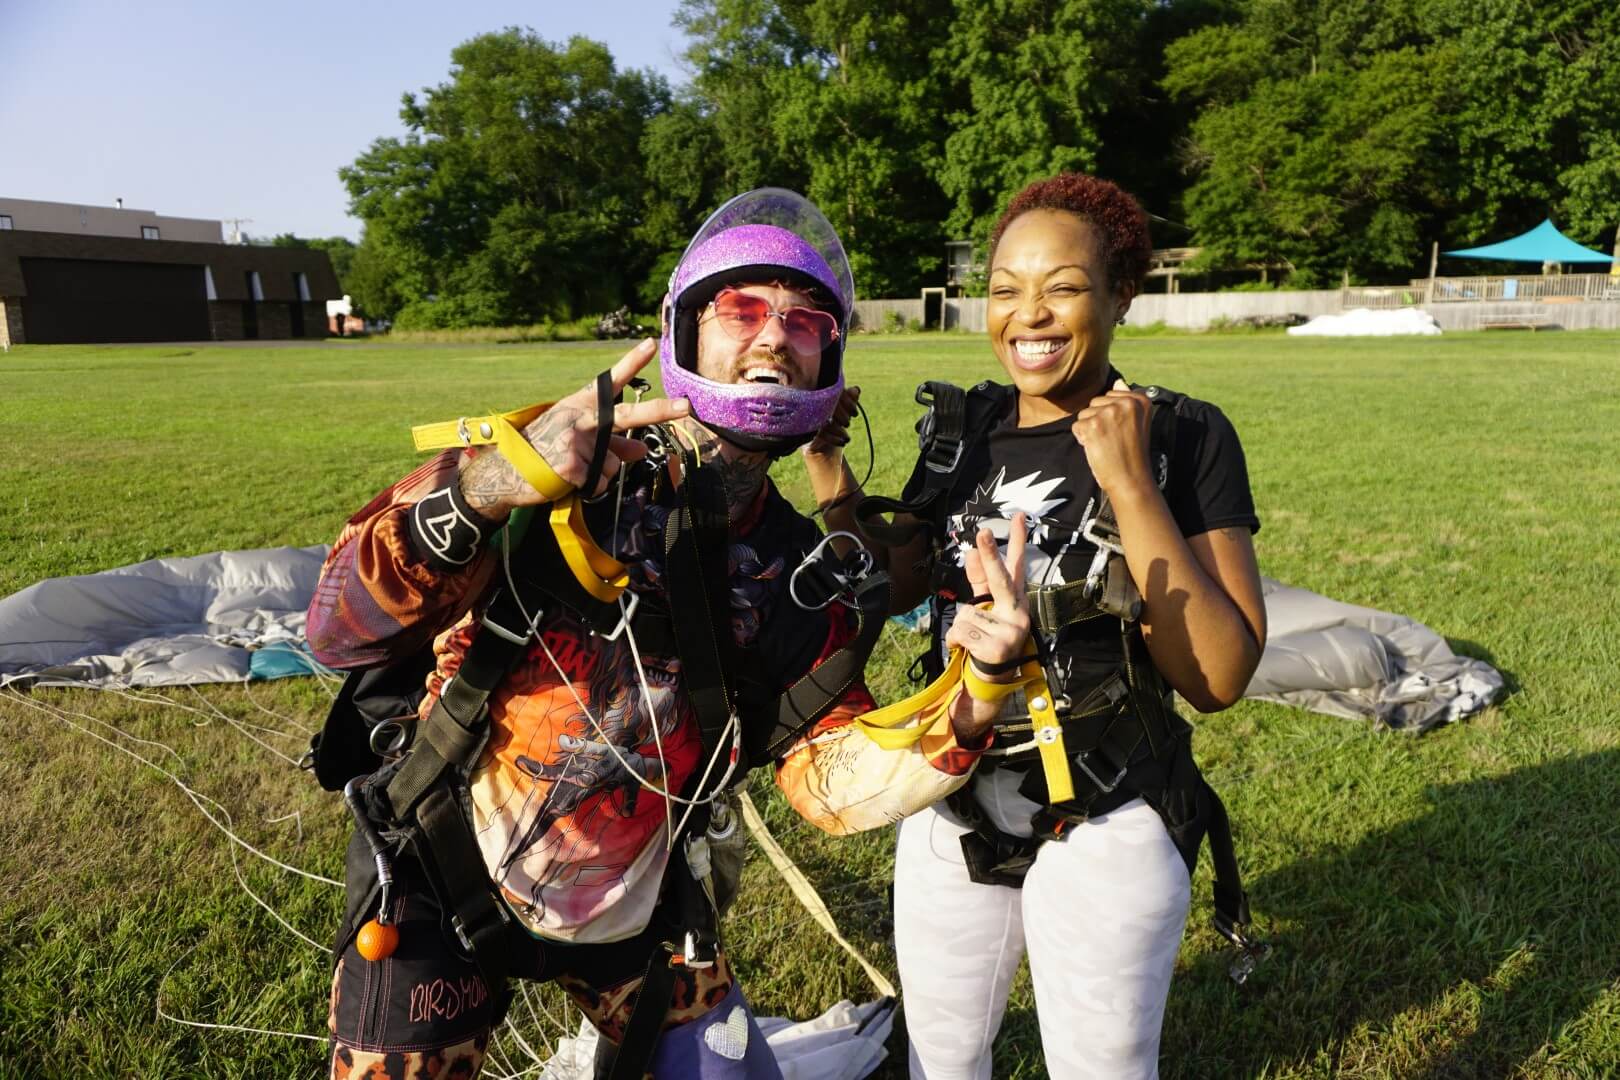 Two friends smiling on the ground after skydiving together.